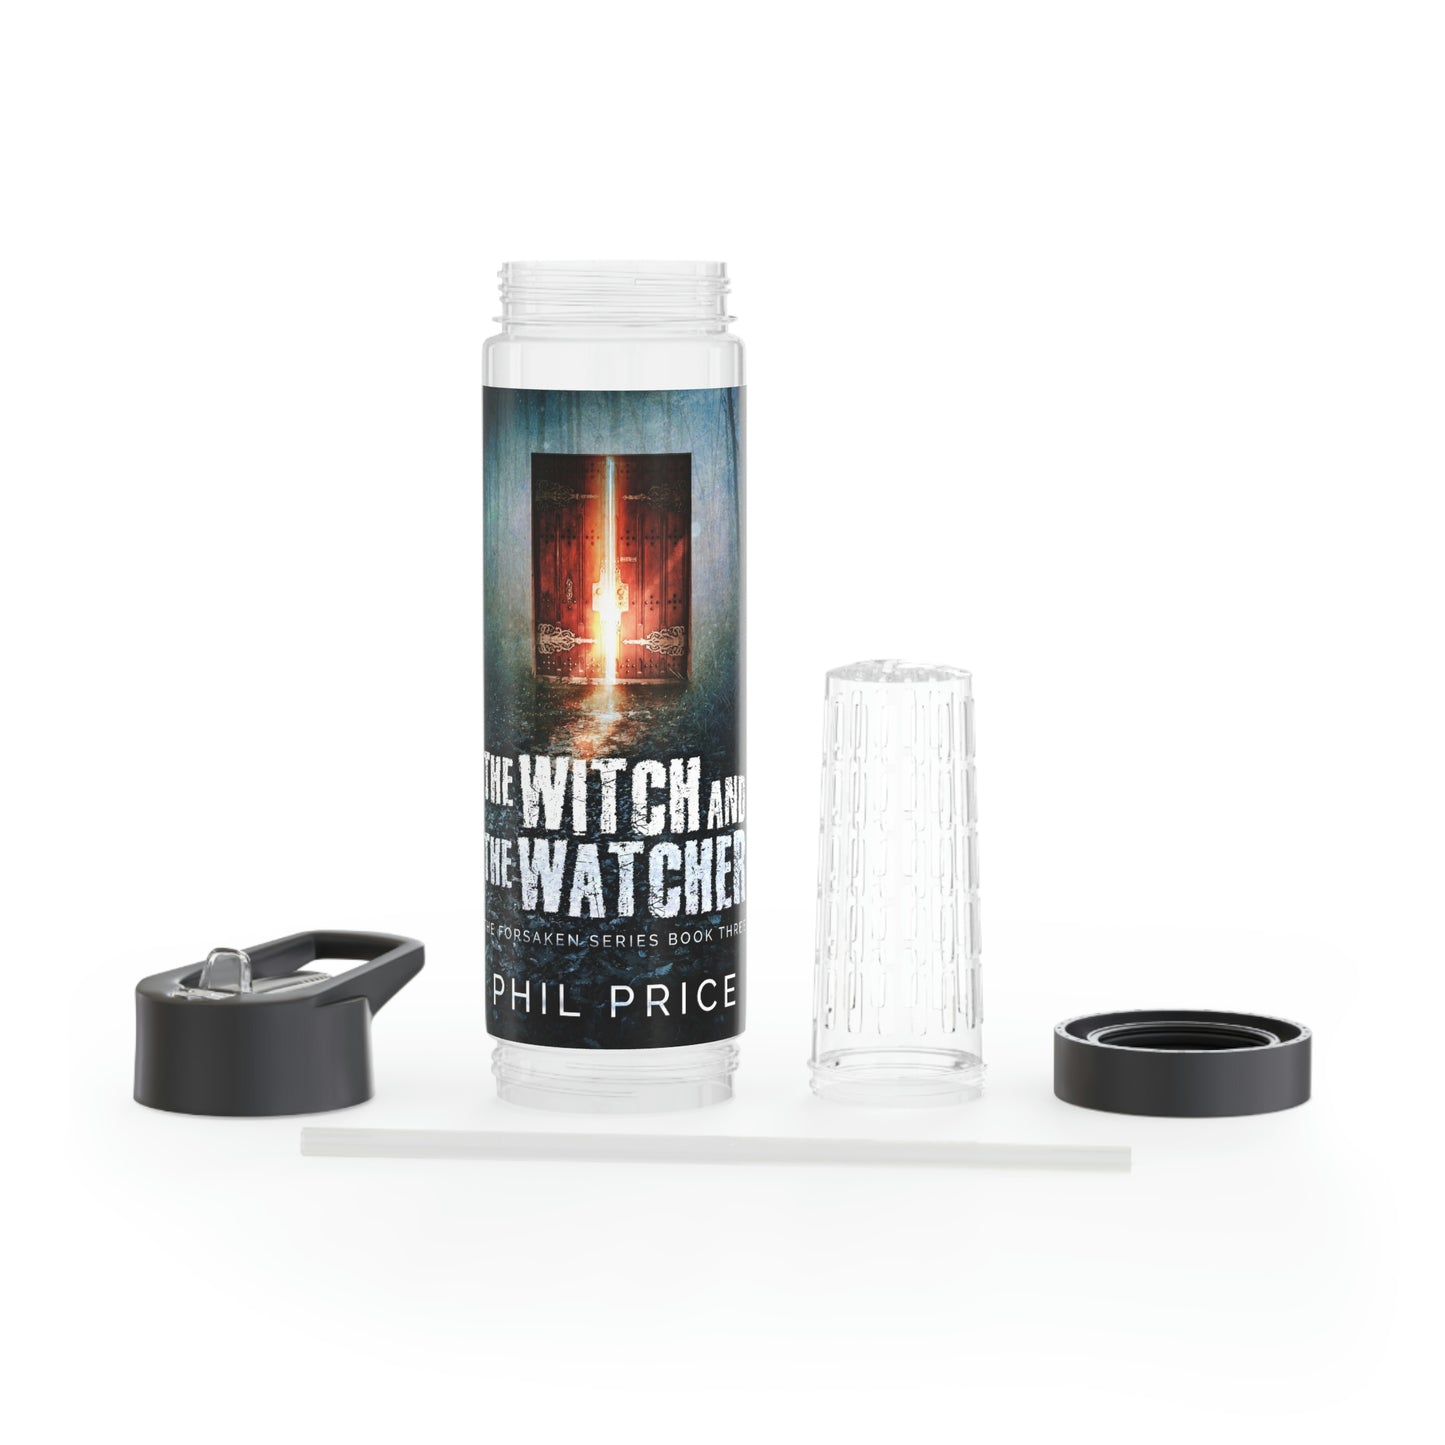 The Witch and the Watcher - Infuser Water Bottle